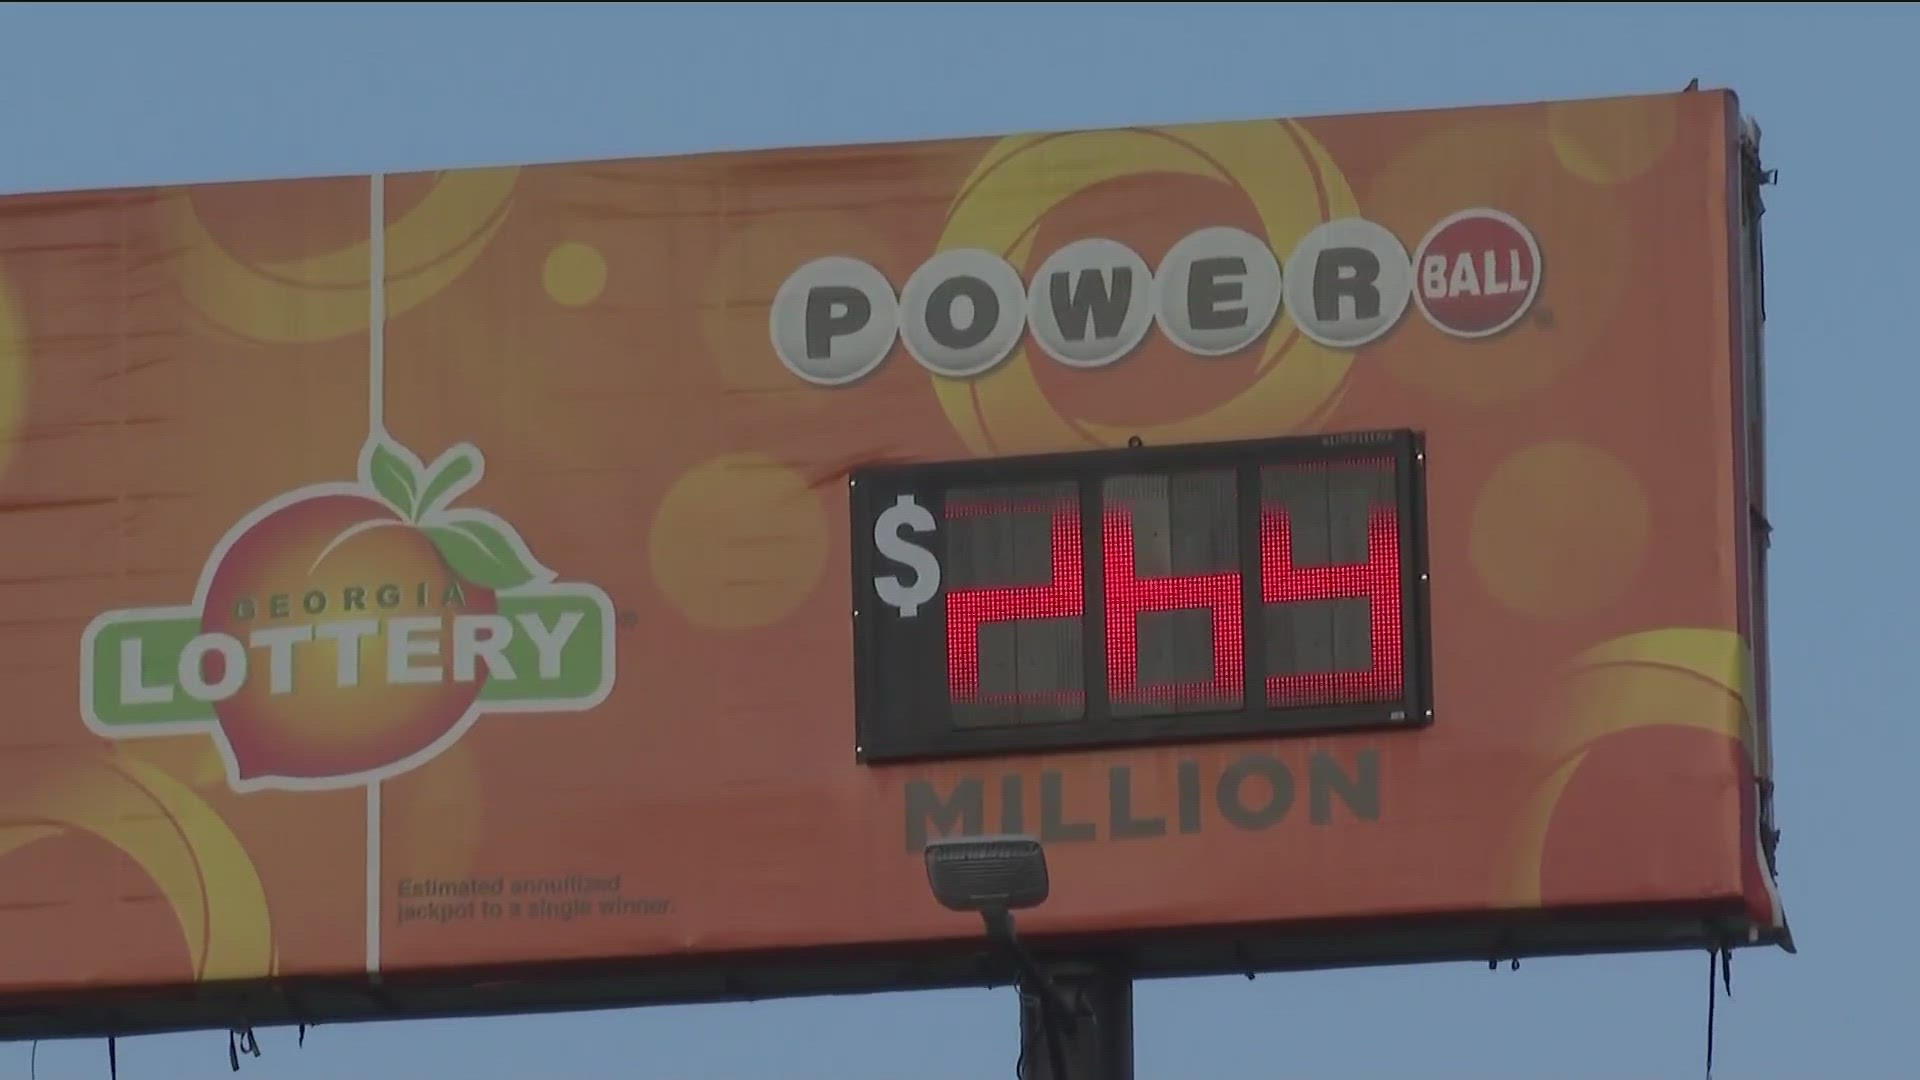 No one around the country won the jackpot, which will jump to $269 million.